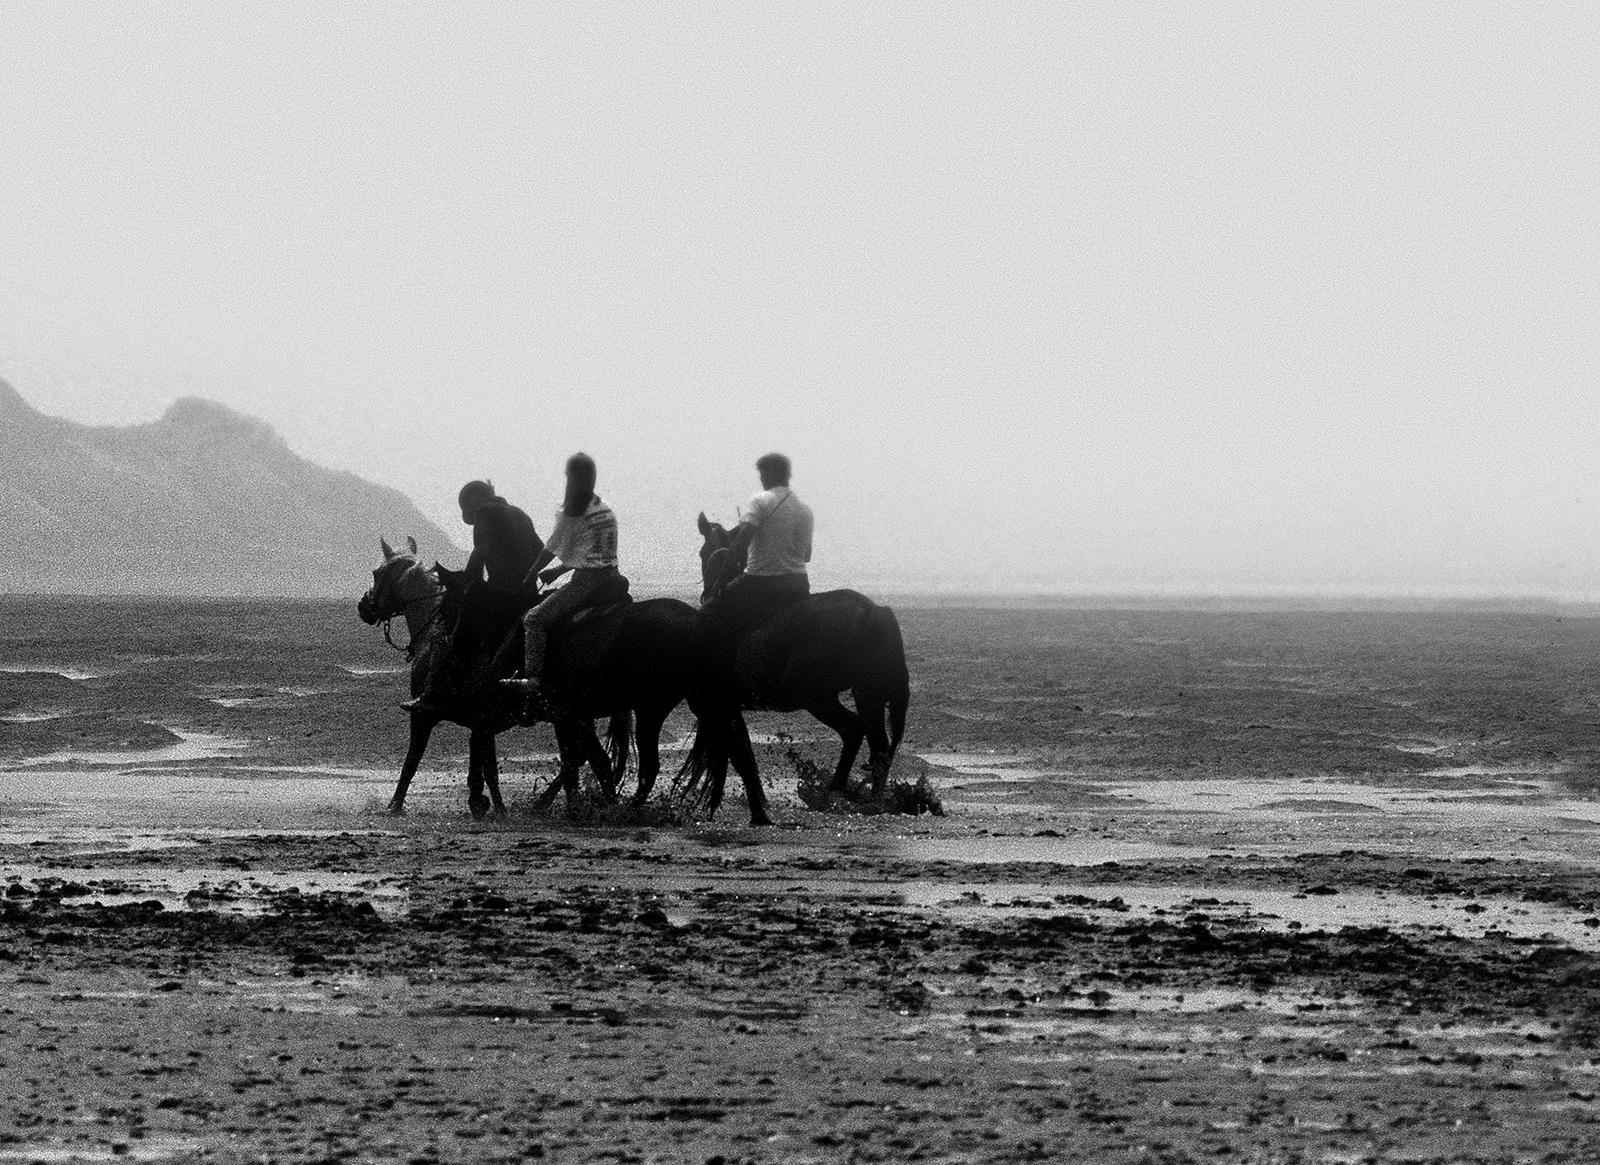 Horses - Signed limited edition nature print, Black and white photo, Landscape - Photograph by Ian Sanderson